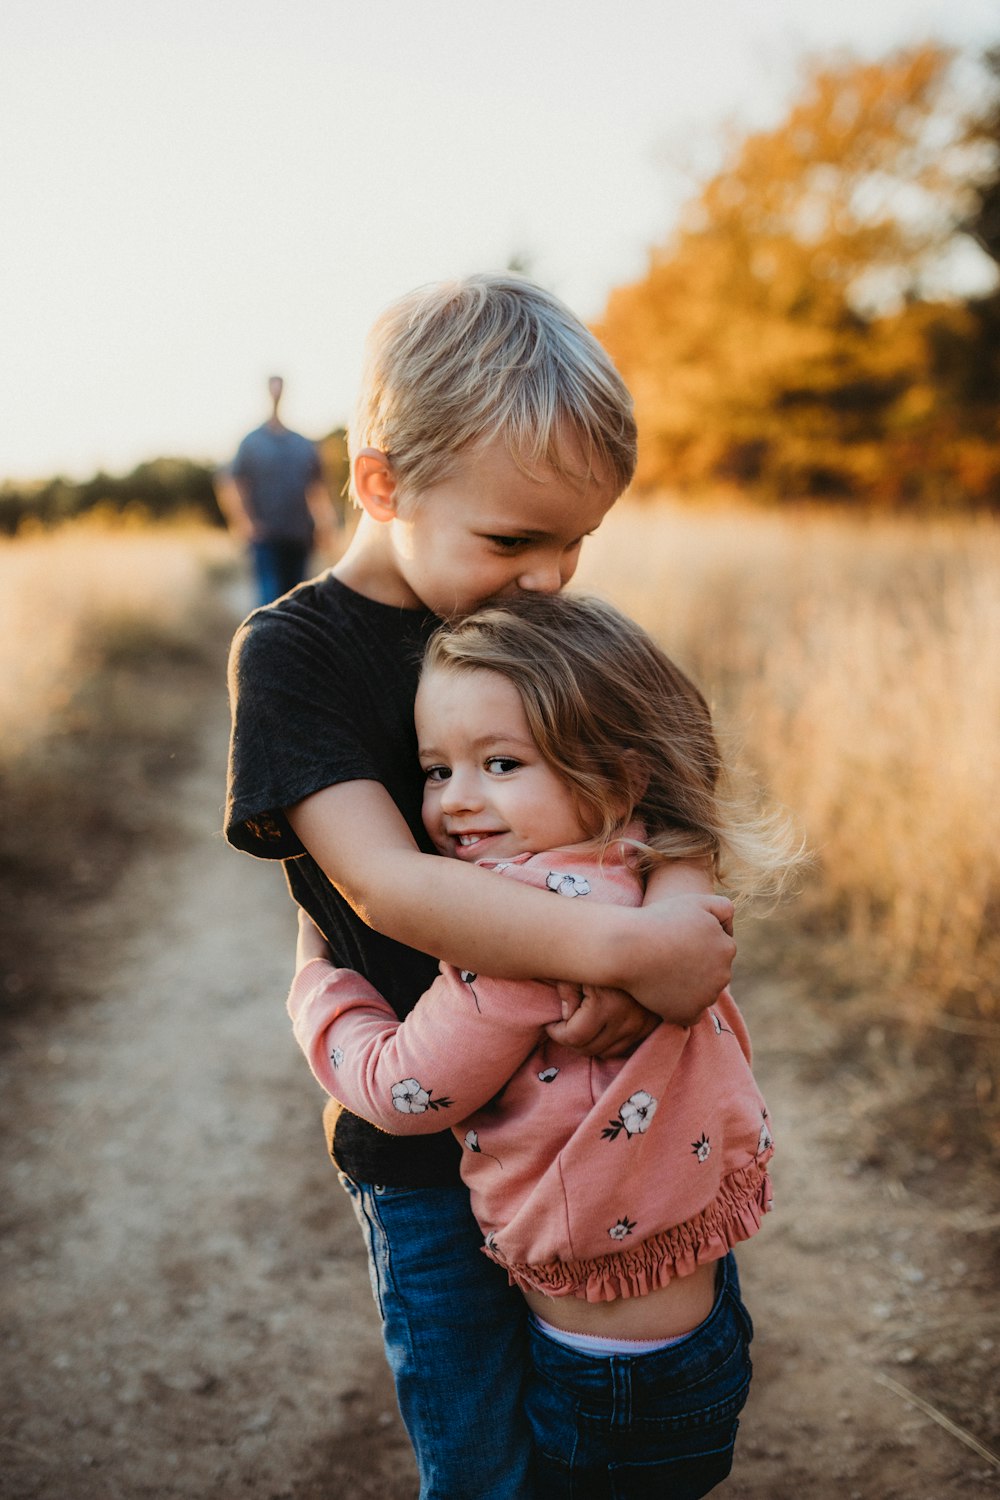 Sister And Brother Pictures | Download Free Images on Unsplash